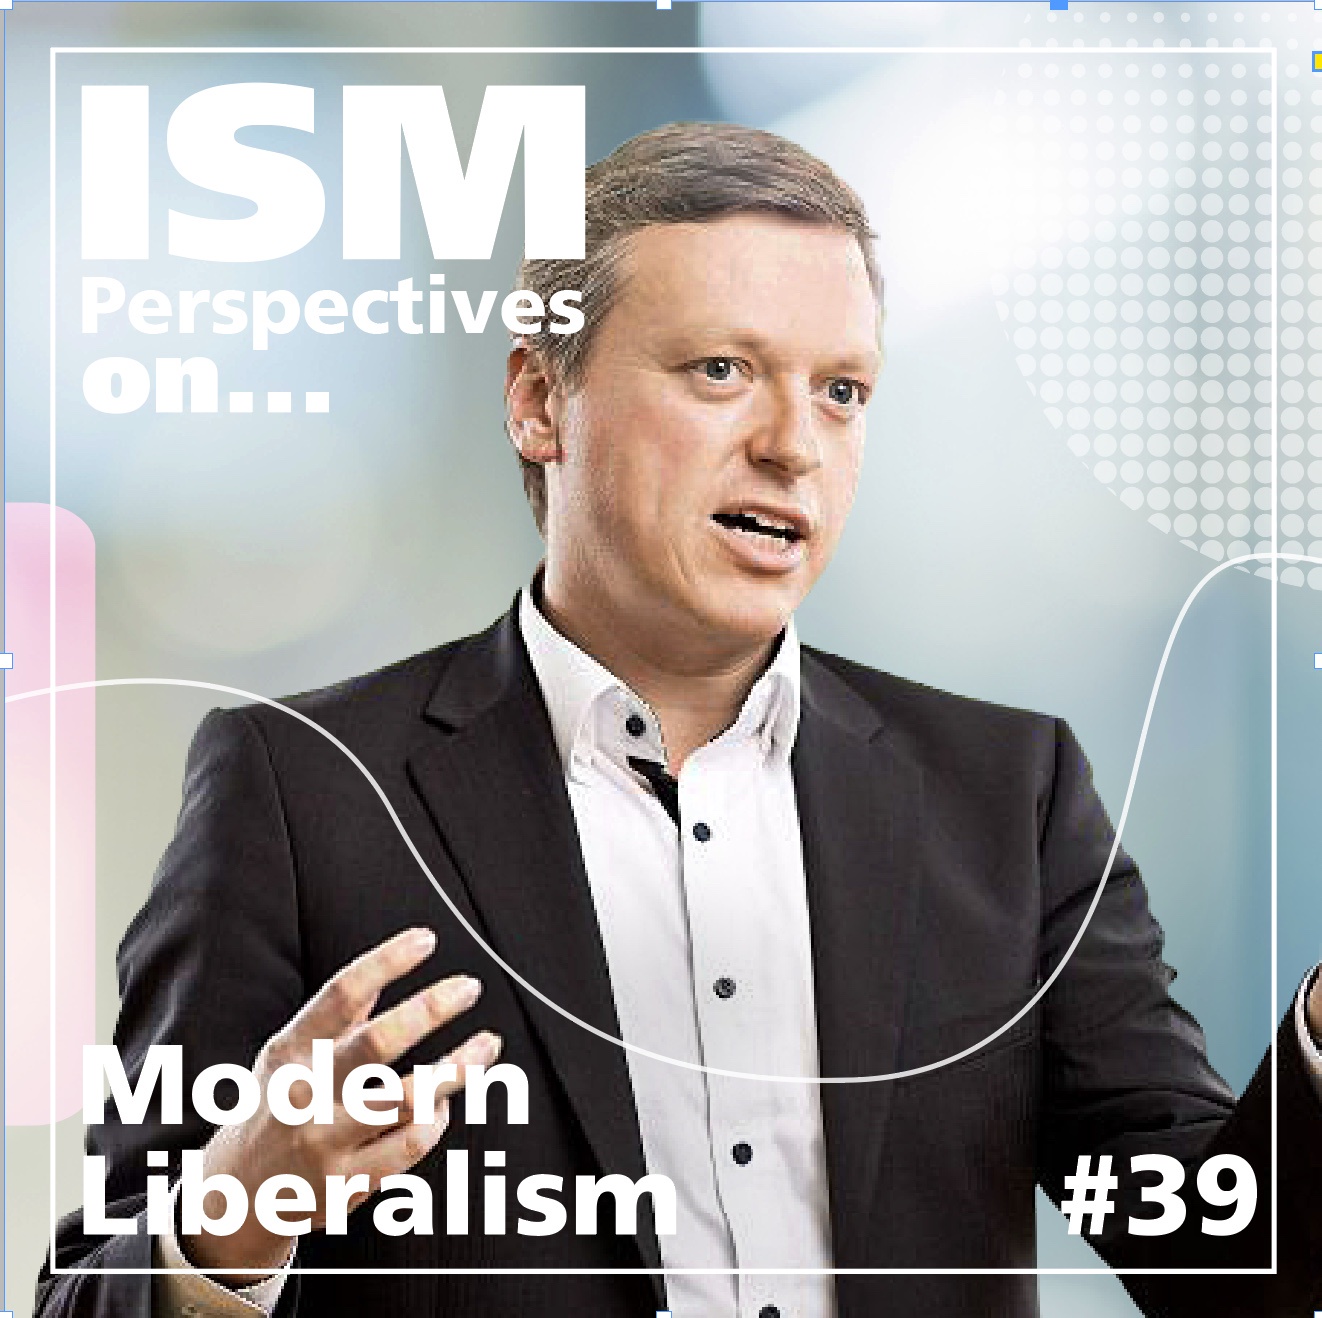 Perspectives on: Modern Liberalism